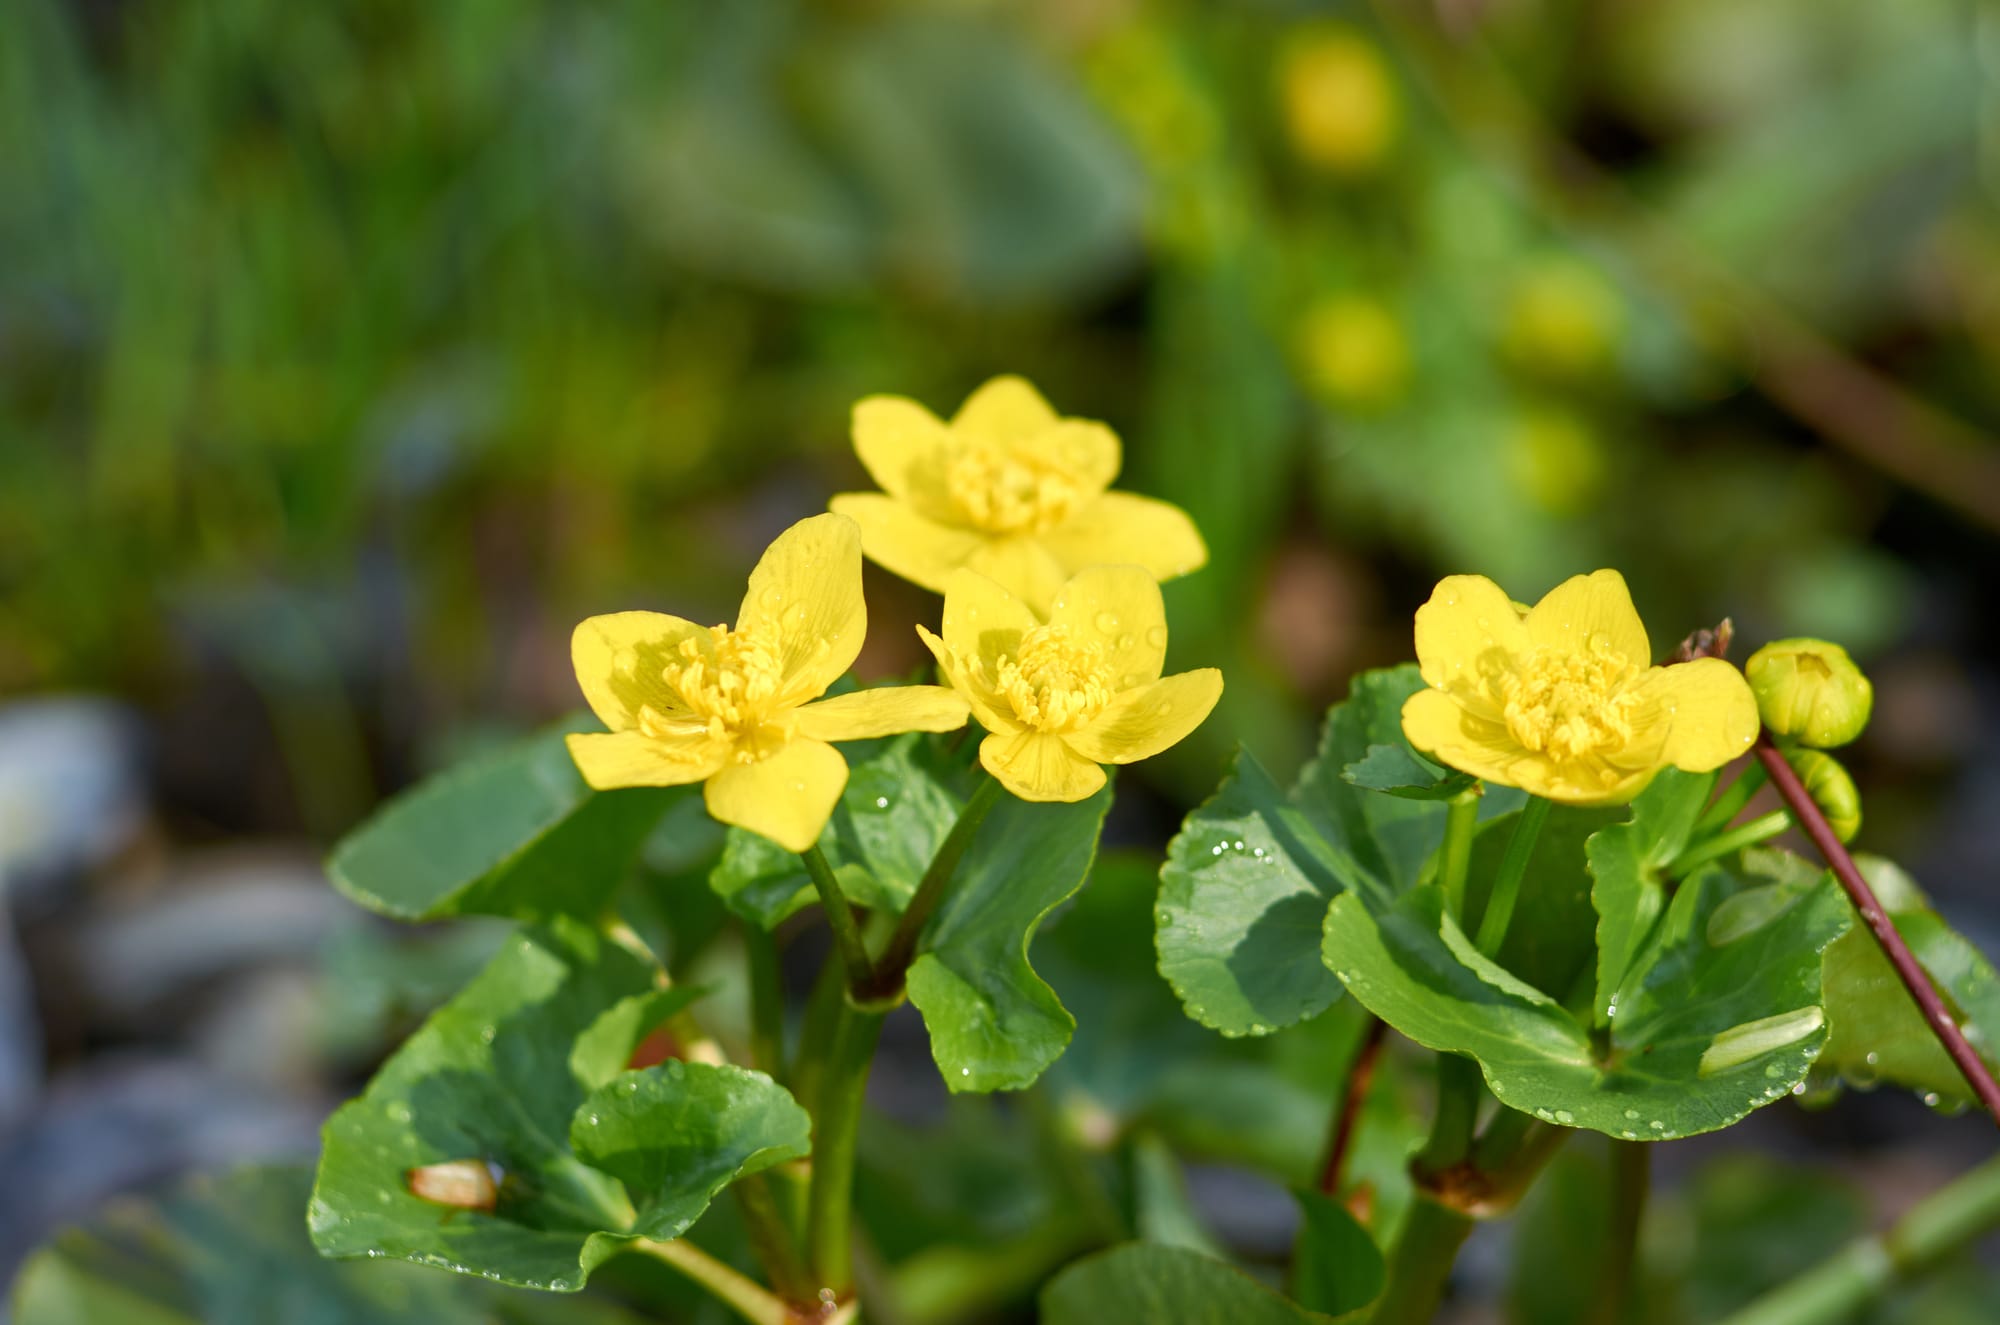 Blossoming marsh marigold in the spring